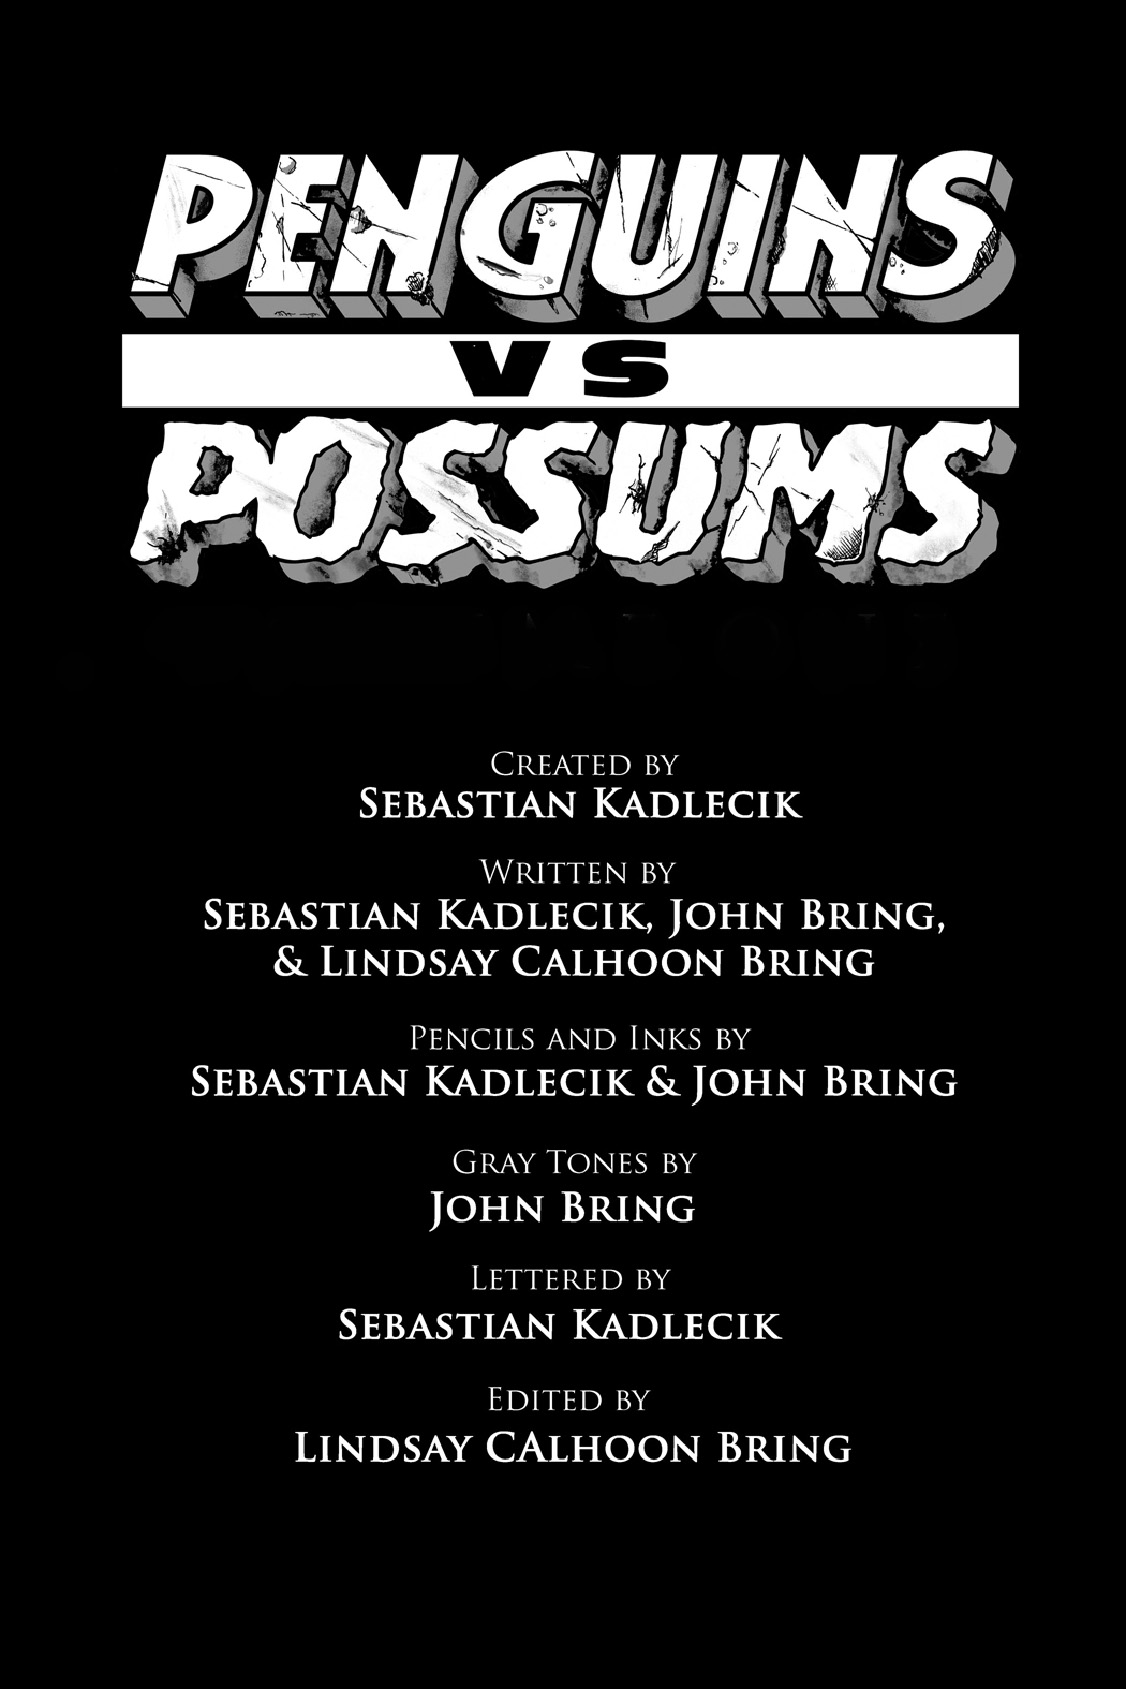 Read online Free Comic Book Day 2014 comic -  Issue # Penguins vs. Possums 001 - FCBD Edition - 3